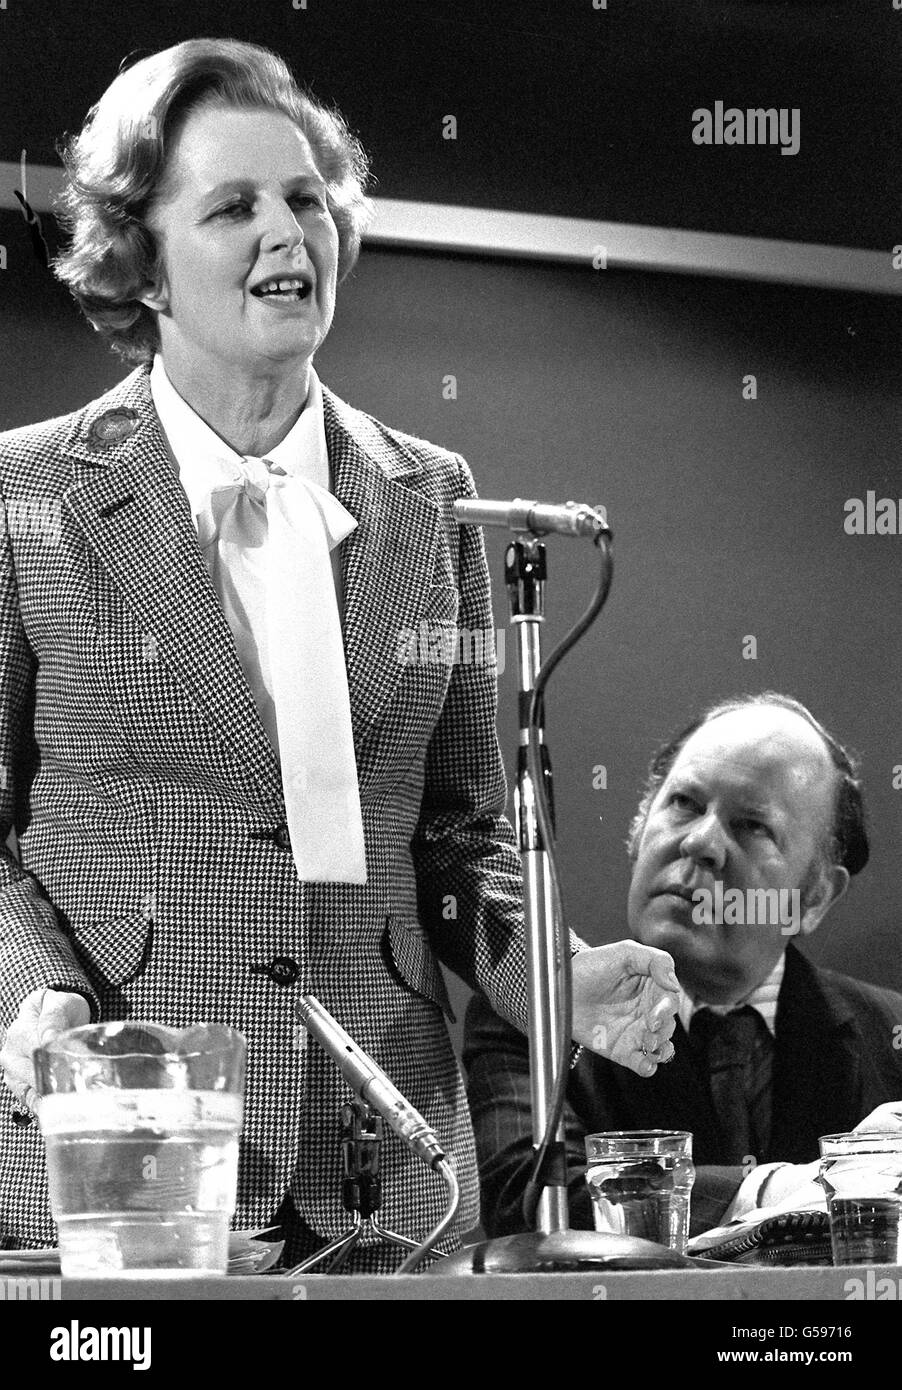 Former Labour Minister Mr Reg Prentice listens intently as Tory leader Mrs Margaret Thatcher introduces him at her General Election Press conference in London. * 19/1/2001: Lord Prentice of Daventry, the former Labour minister who defected to the Tories in the 1970s, has died aged 77, Conservative Central Office said. As the MP for Newham North East, Reg Prentice as he then was, caused a political storm in 1977 when he left James Callaghan's Labour Party and crossed the floor of the Commons to join the Conservatives. Stock Photo